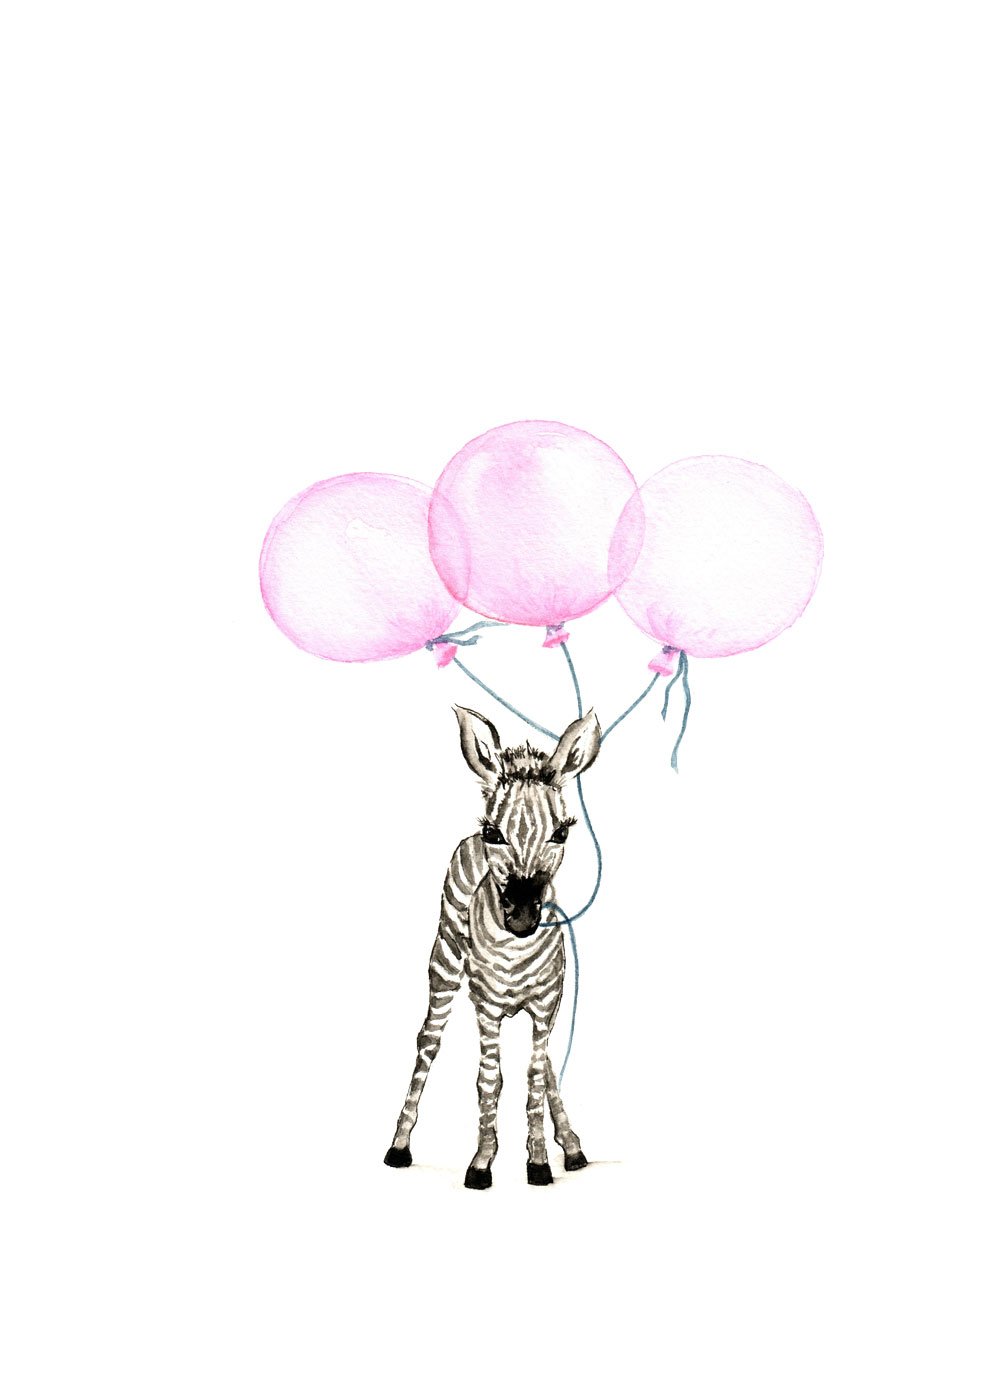 Image of Baby Zebra with Pink Balloons - From the CityLife Collection